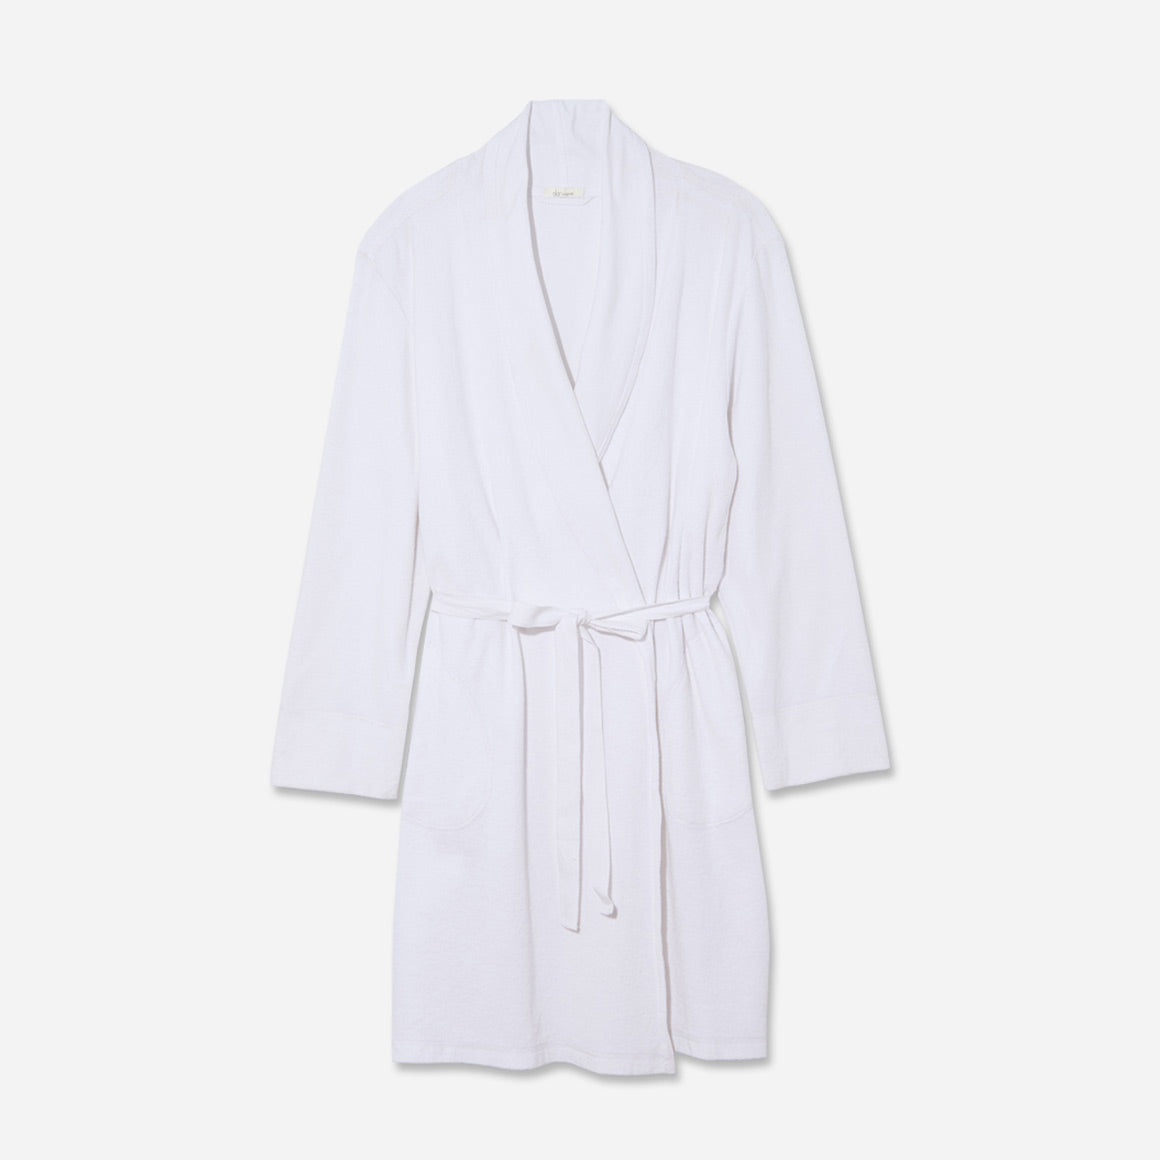 The Micro Terry Robe has a relaxed fit that falls just above the knee. It features two convenient hip pockets and a self-tie belt that allows you to adjust the fit to your preference. The breathable cotton fibers are designed to keep you cool and cozy as you unwind or go about your bedtime routine.